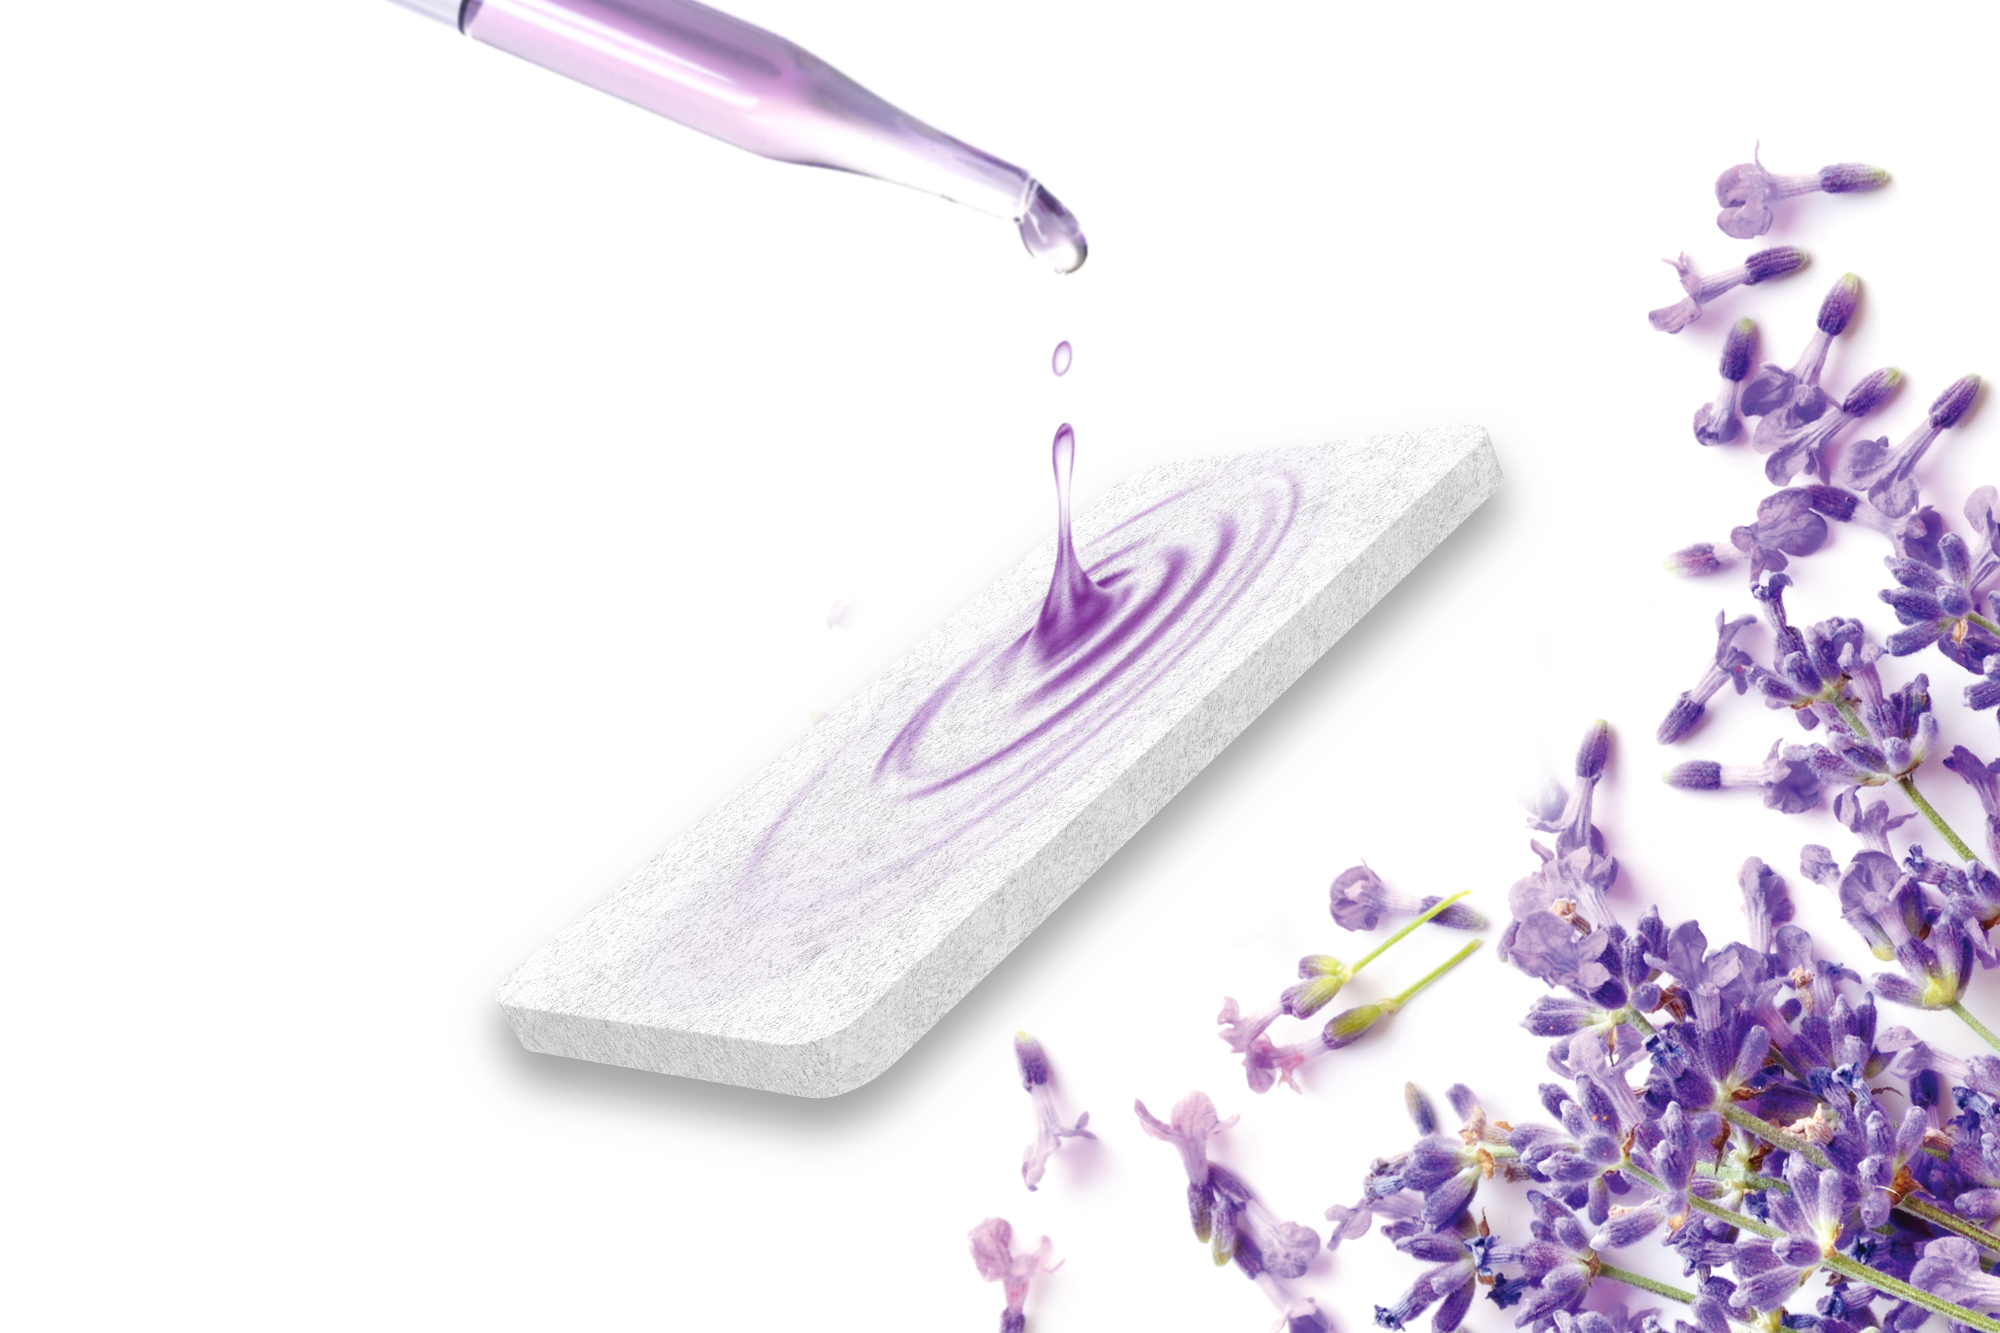 Lavender pre-soaked aroma pad with purple liquid drops and lavender leaves